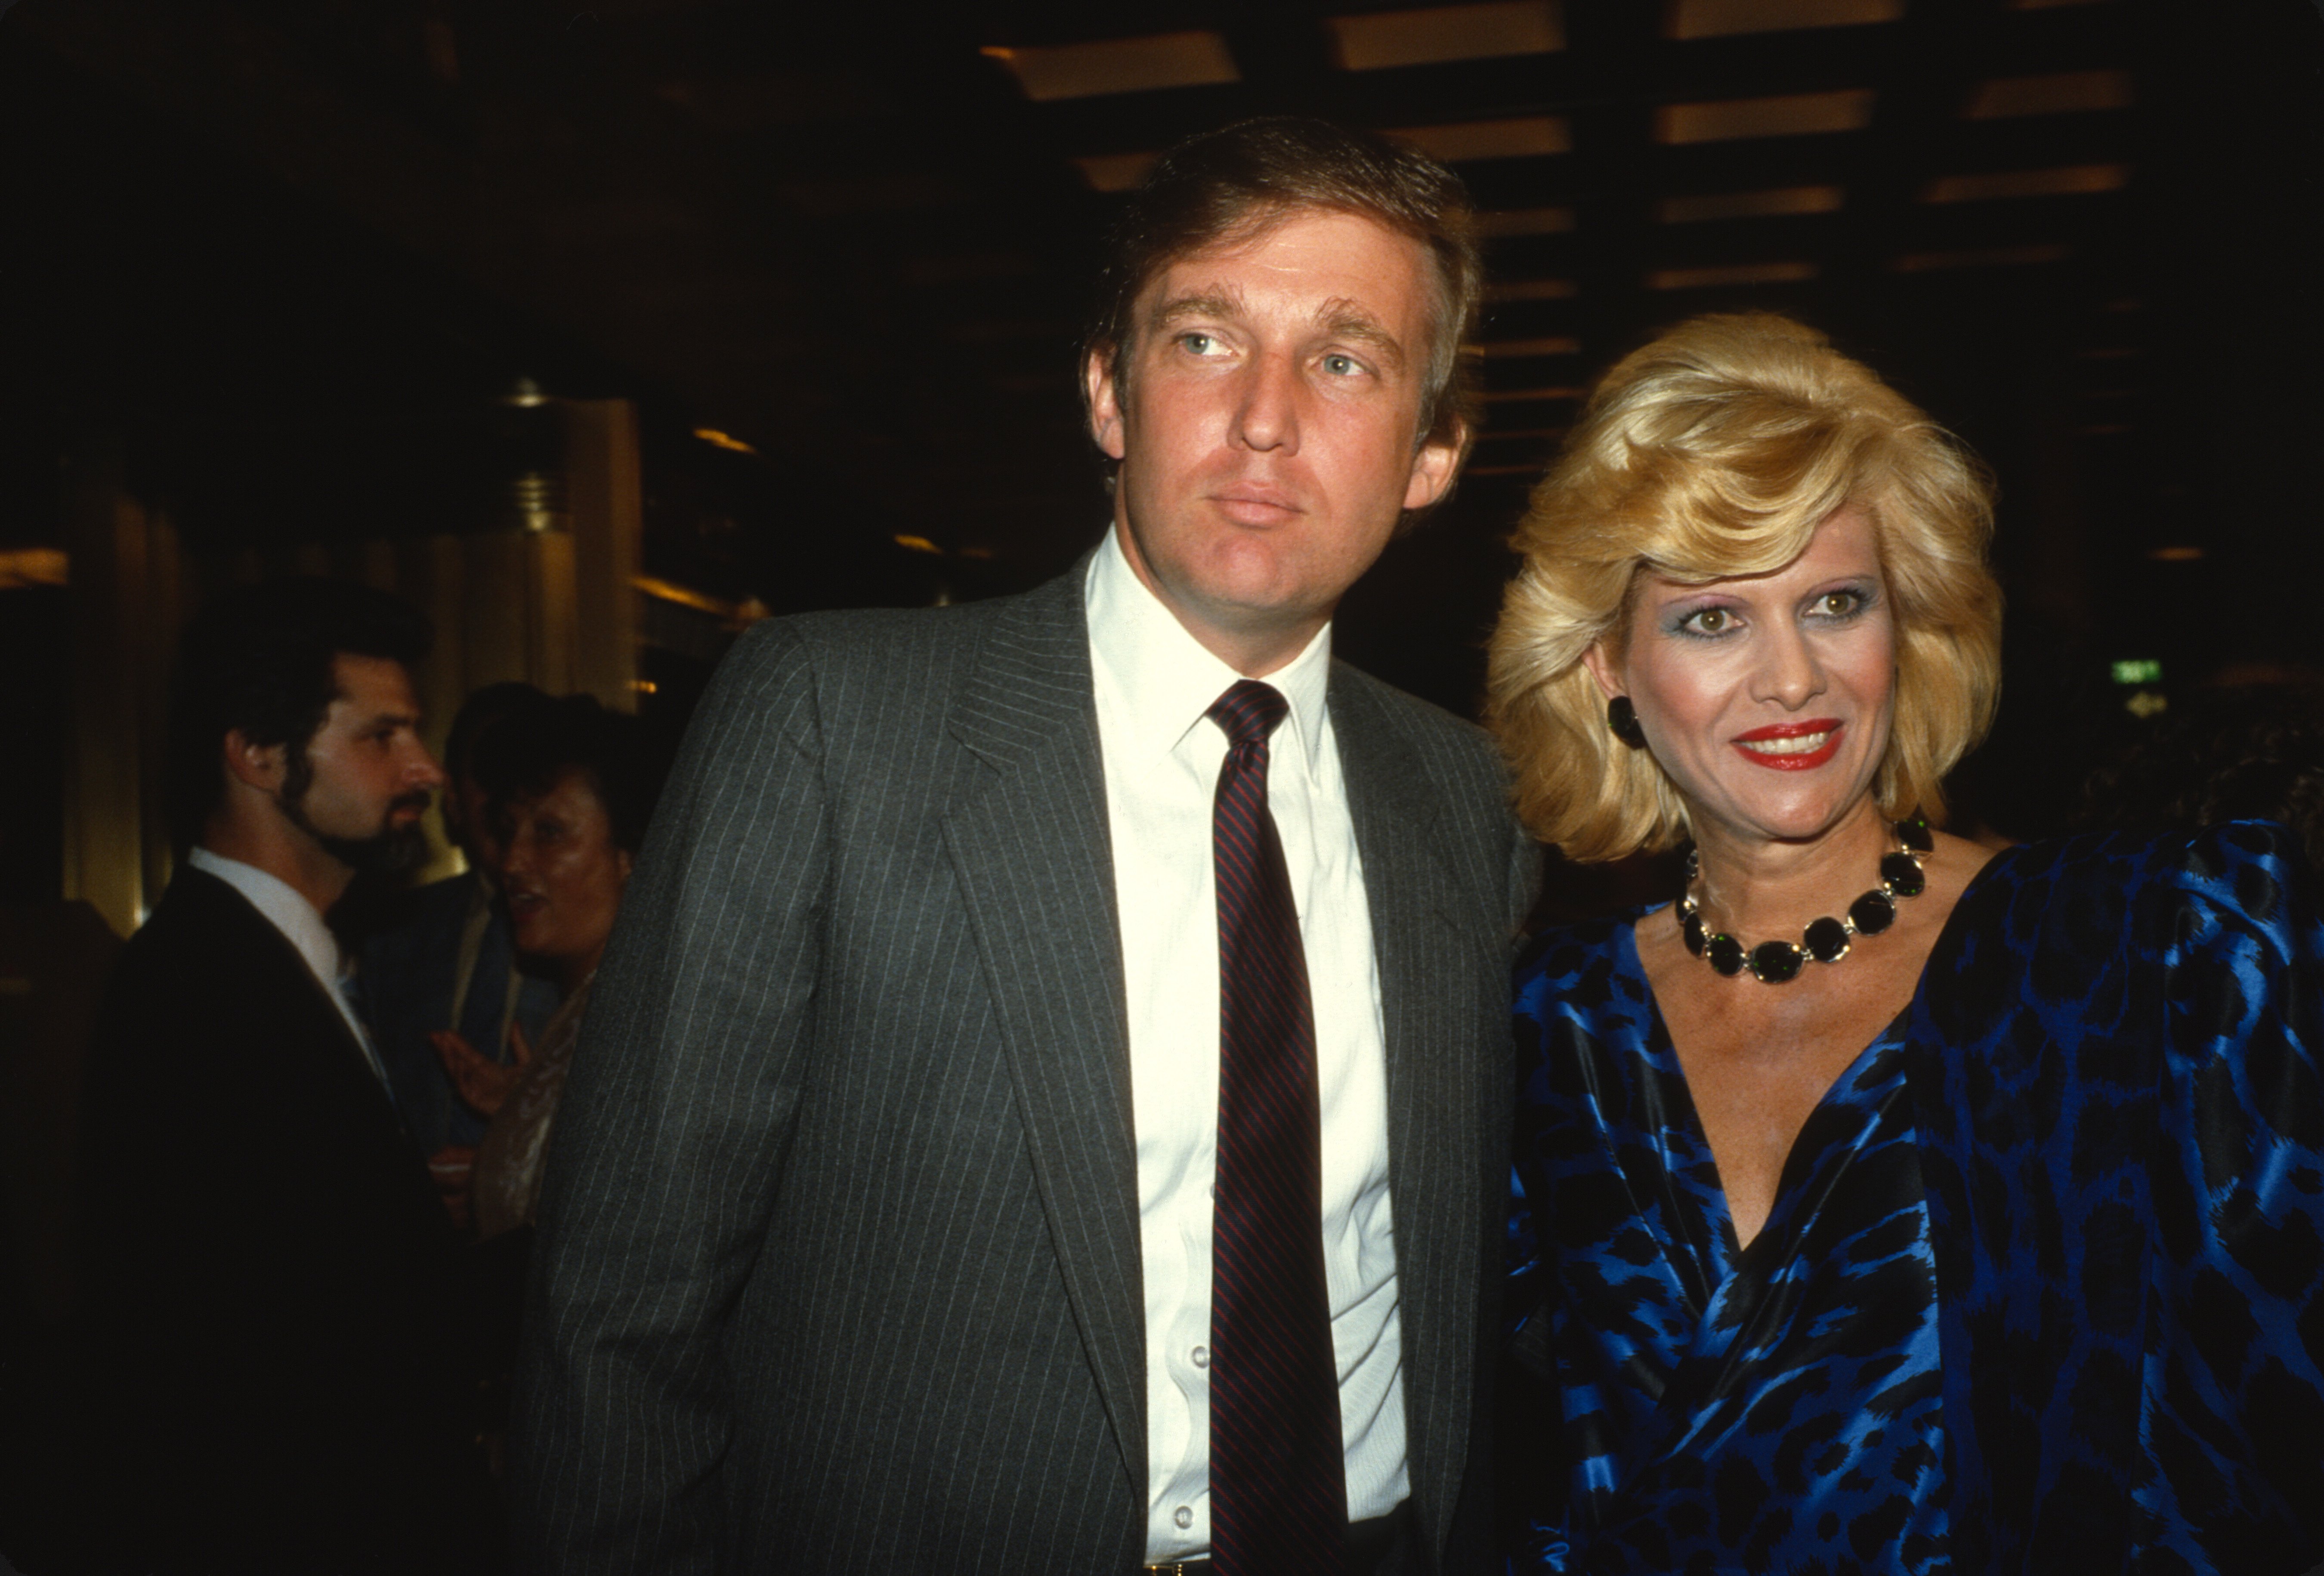 Donald Trump and Ivana Trump September 1984. | Source: Getty Images